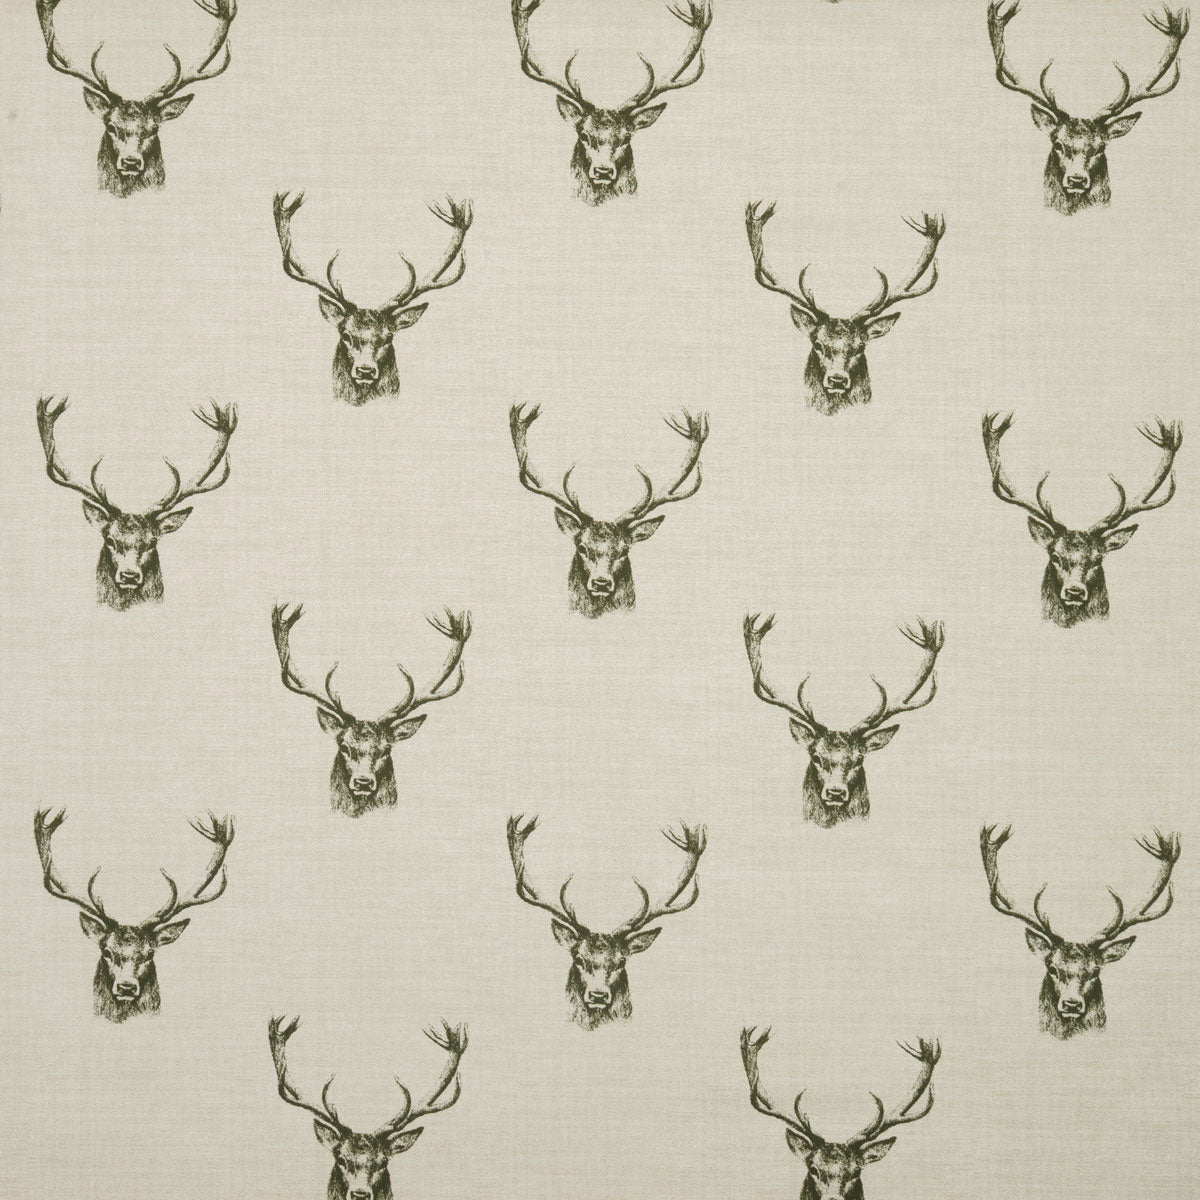 Stags Curtain Fabric Charcoal